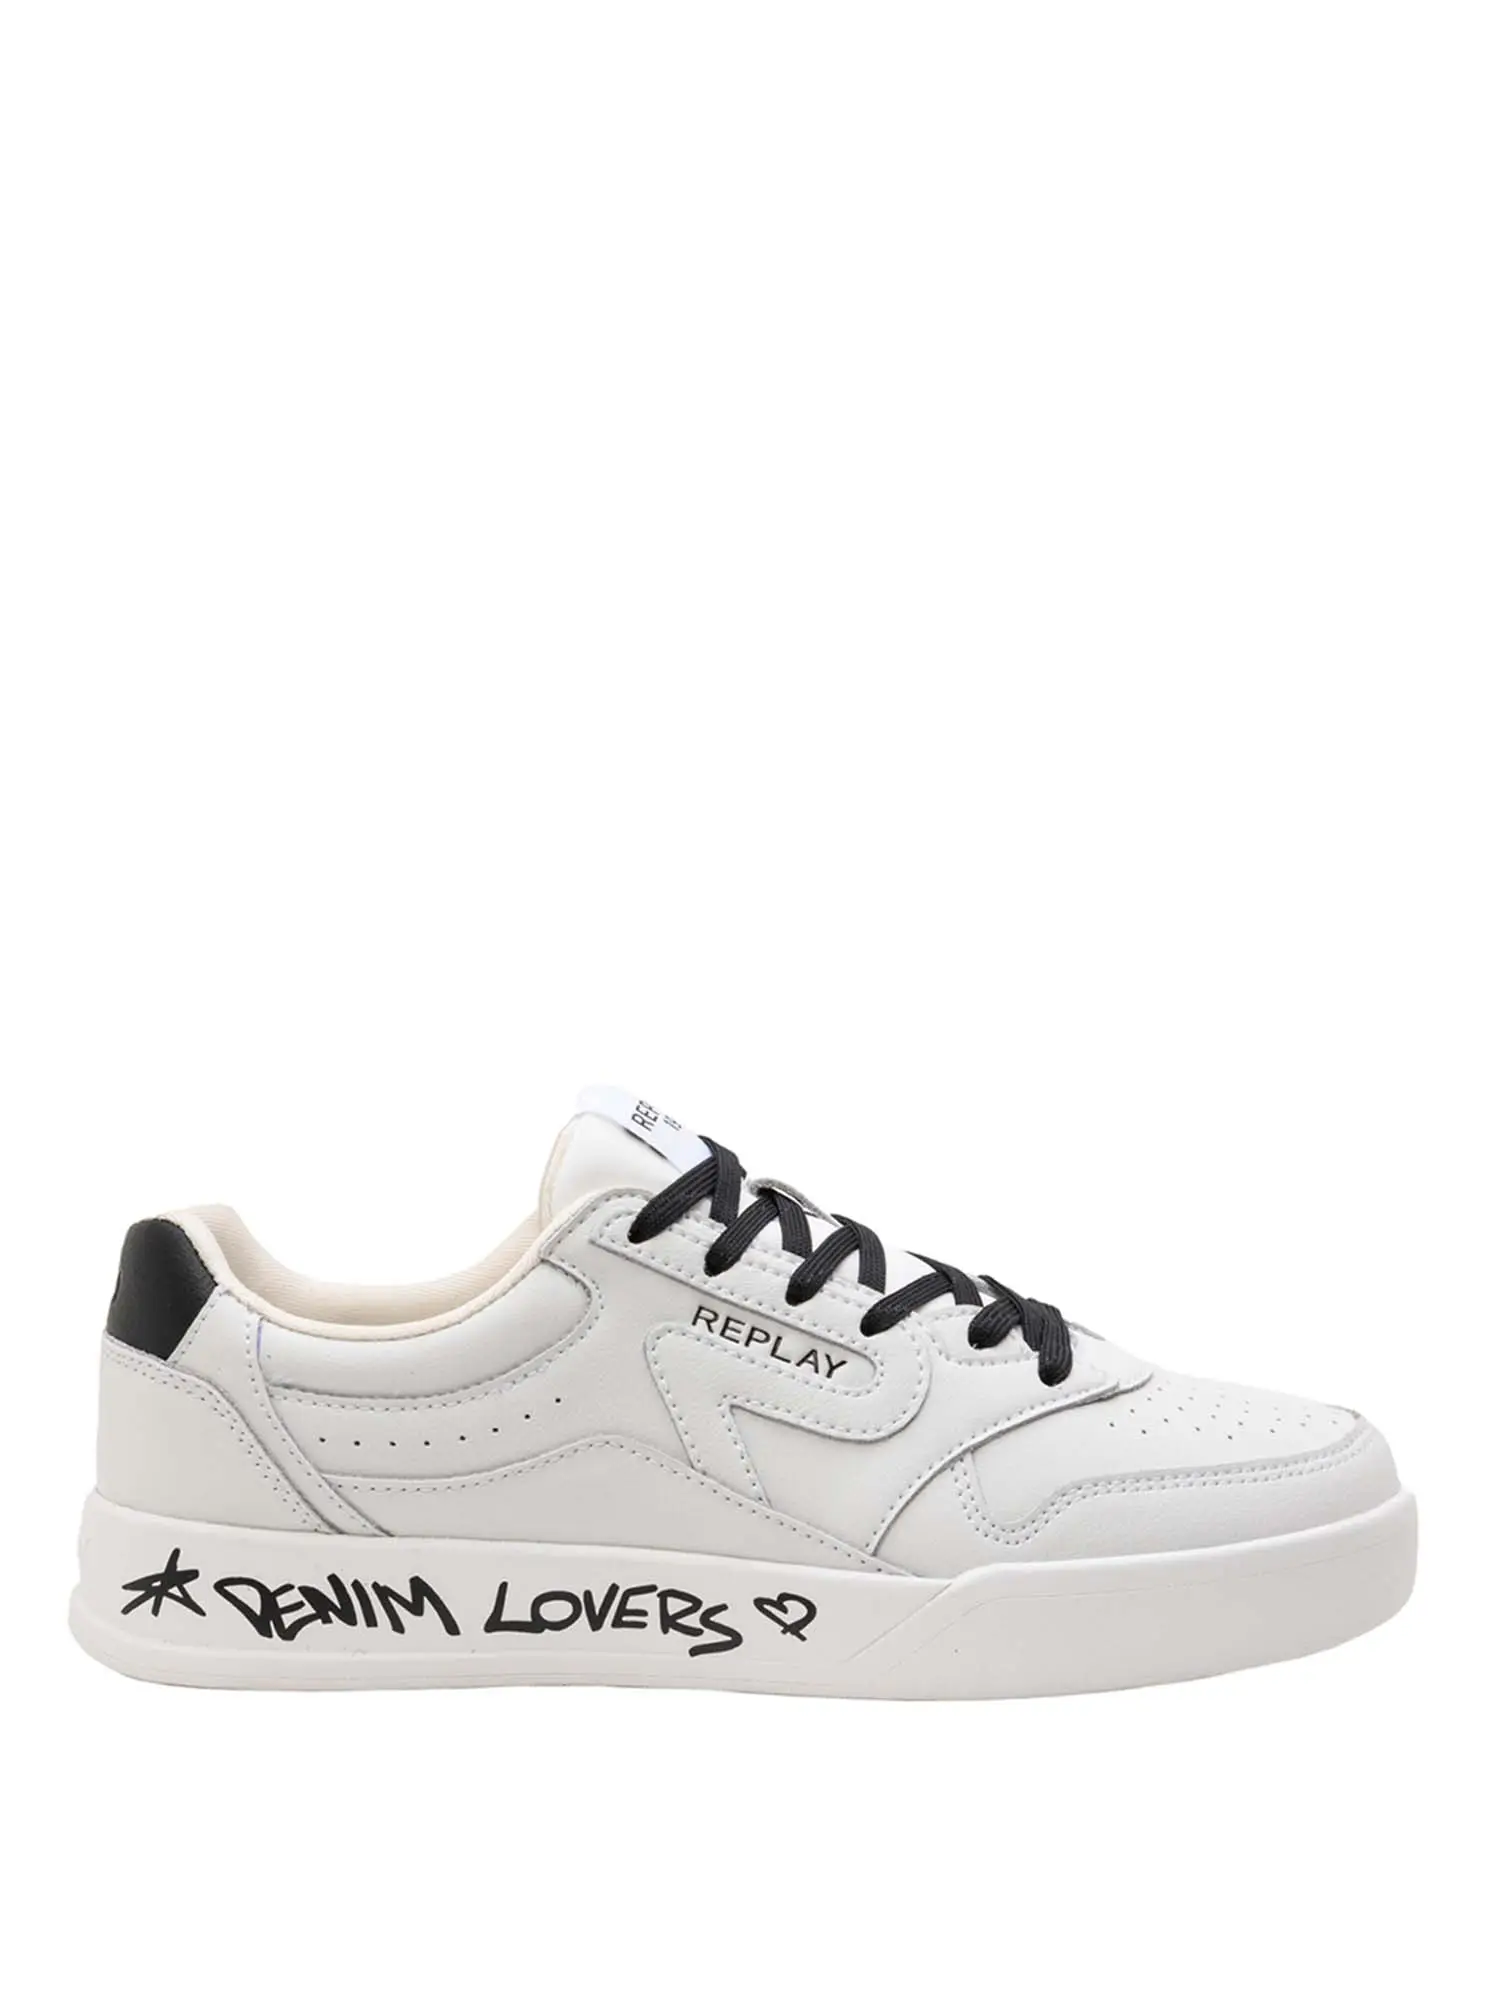 SNEAKERS DONNA - REPLAY - RZ6G0001L - BIANCO/NERO, 39